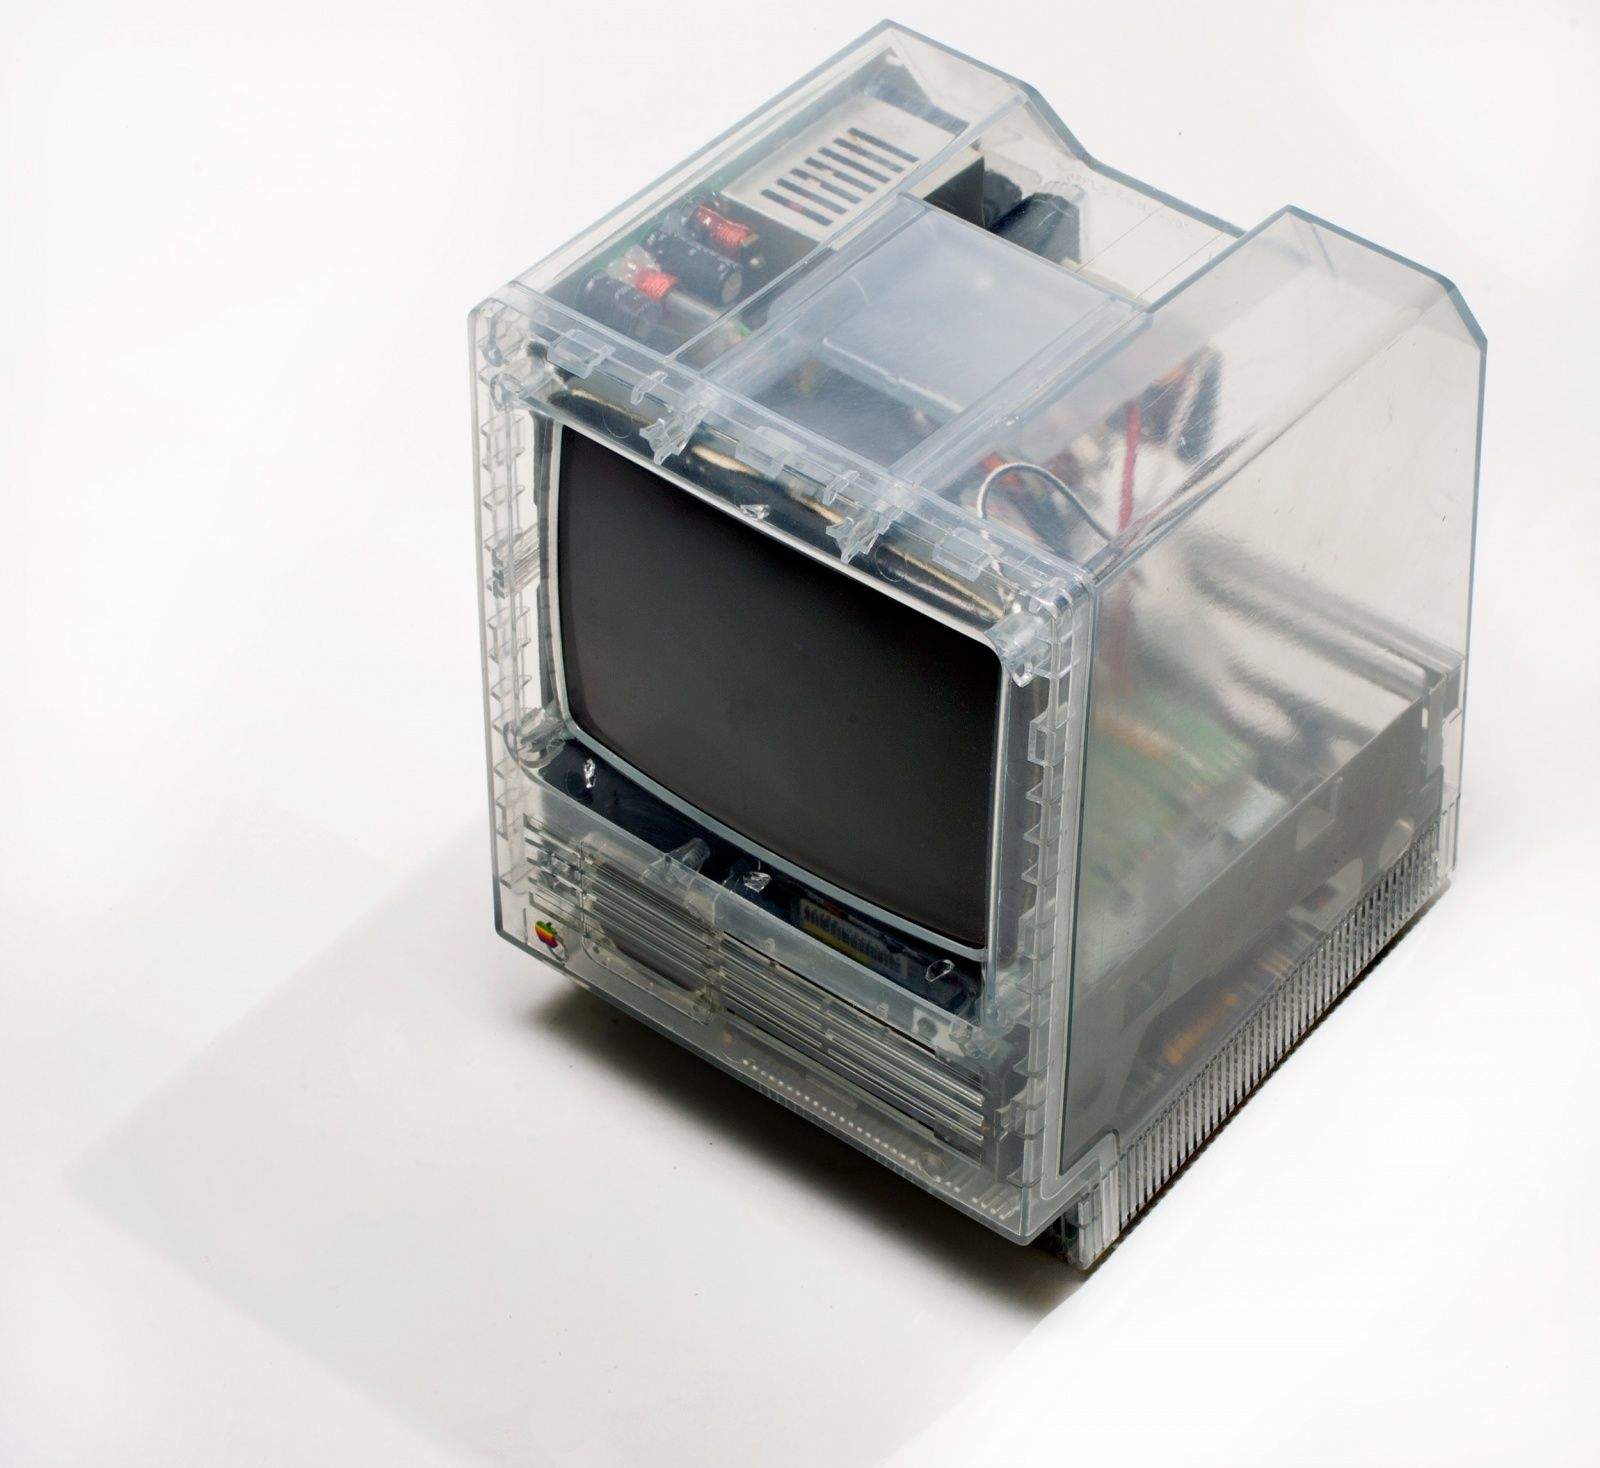 From Henry Plain’s collection, this clear-sided Macintosh SE was used for engineering tests to check airflow and heat dissipation. Photo: Jim Merithew/Cult of Mac